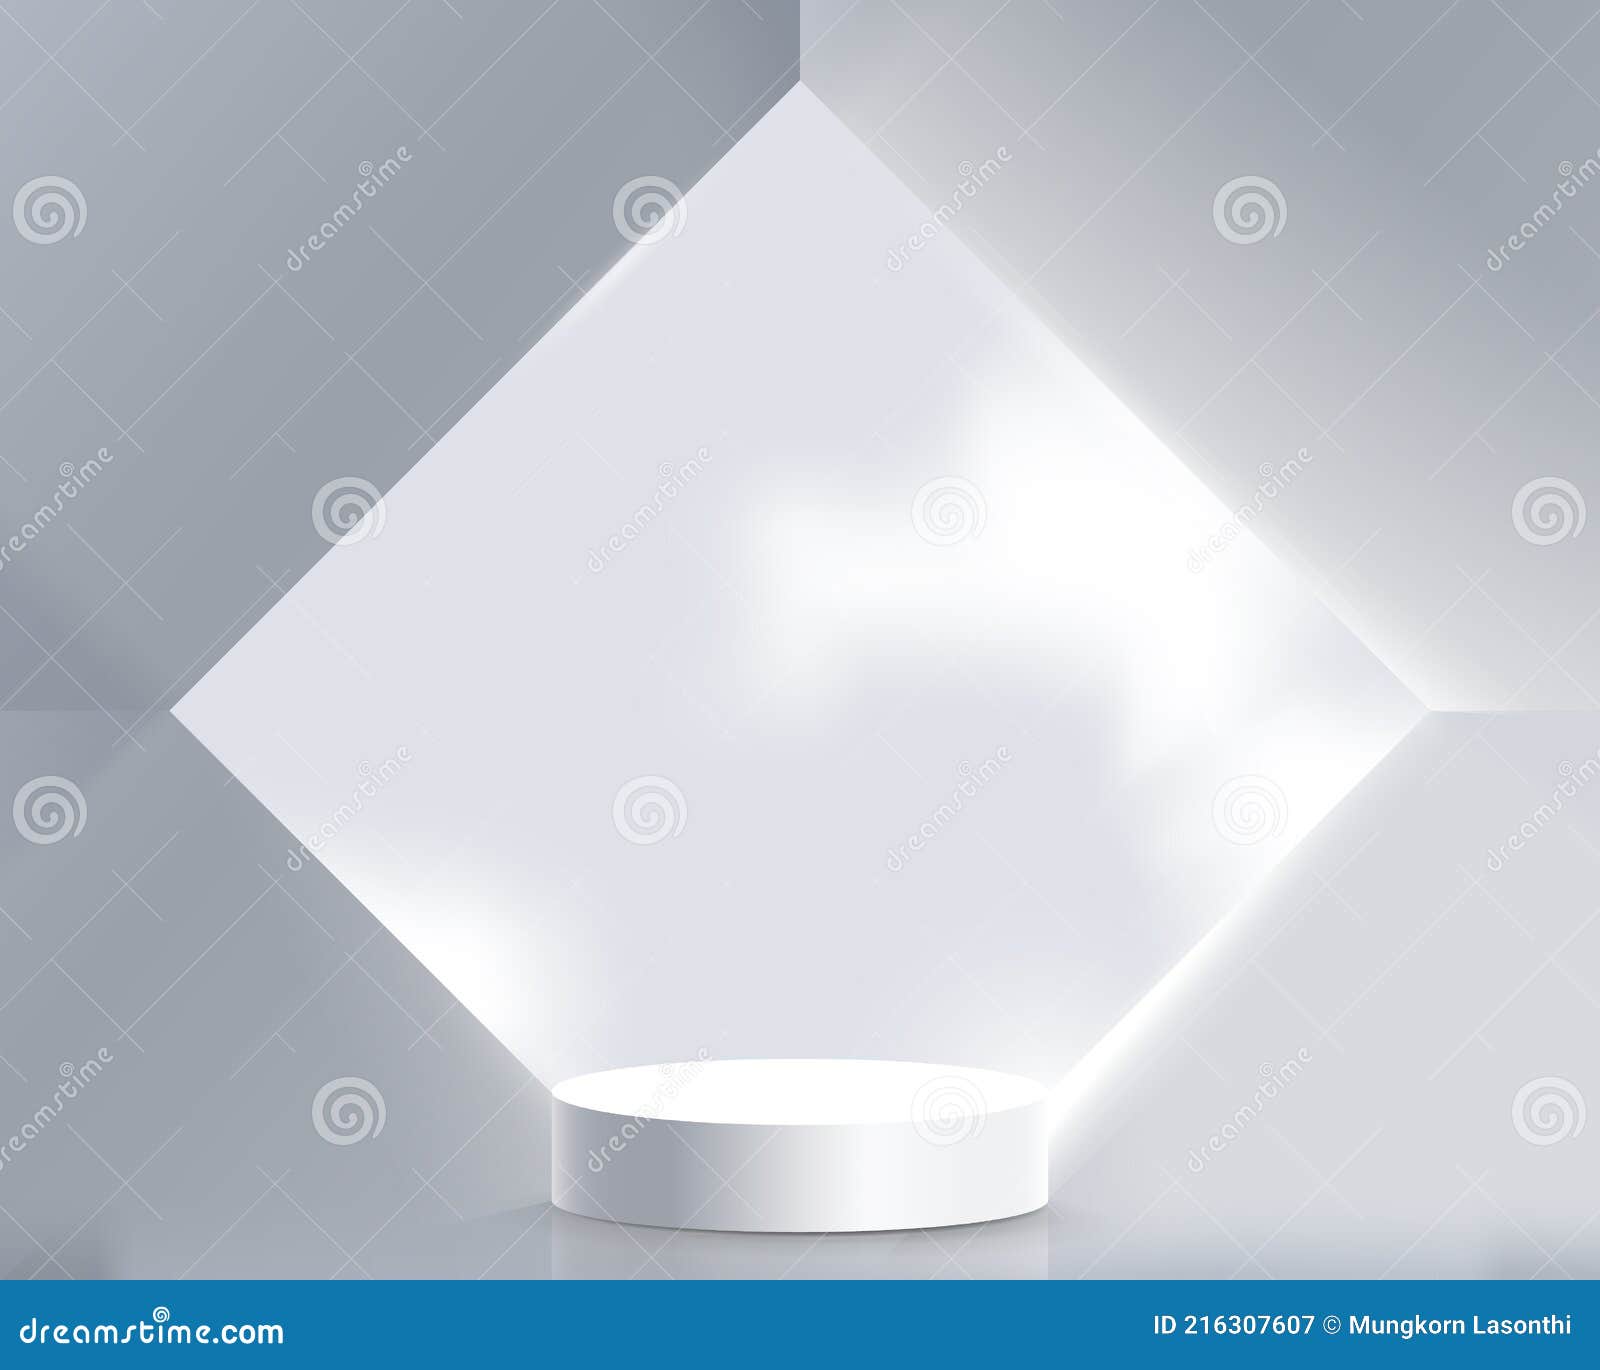 white product display mock up with geometric abstract architecture interior. 3d podium.  